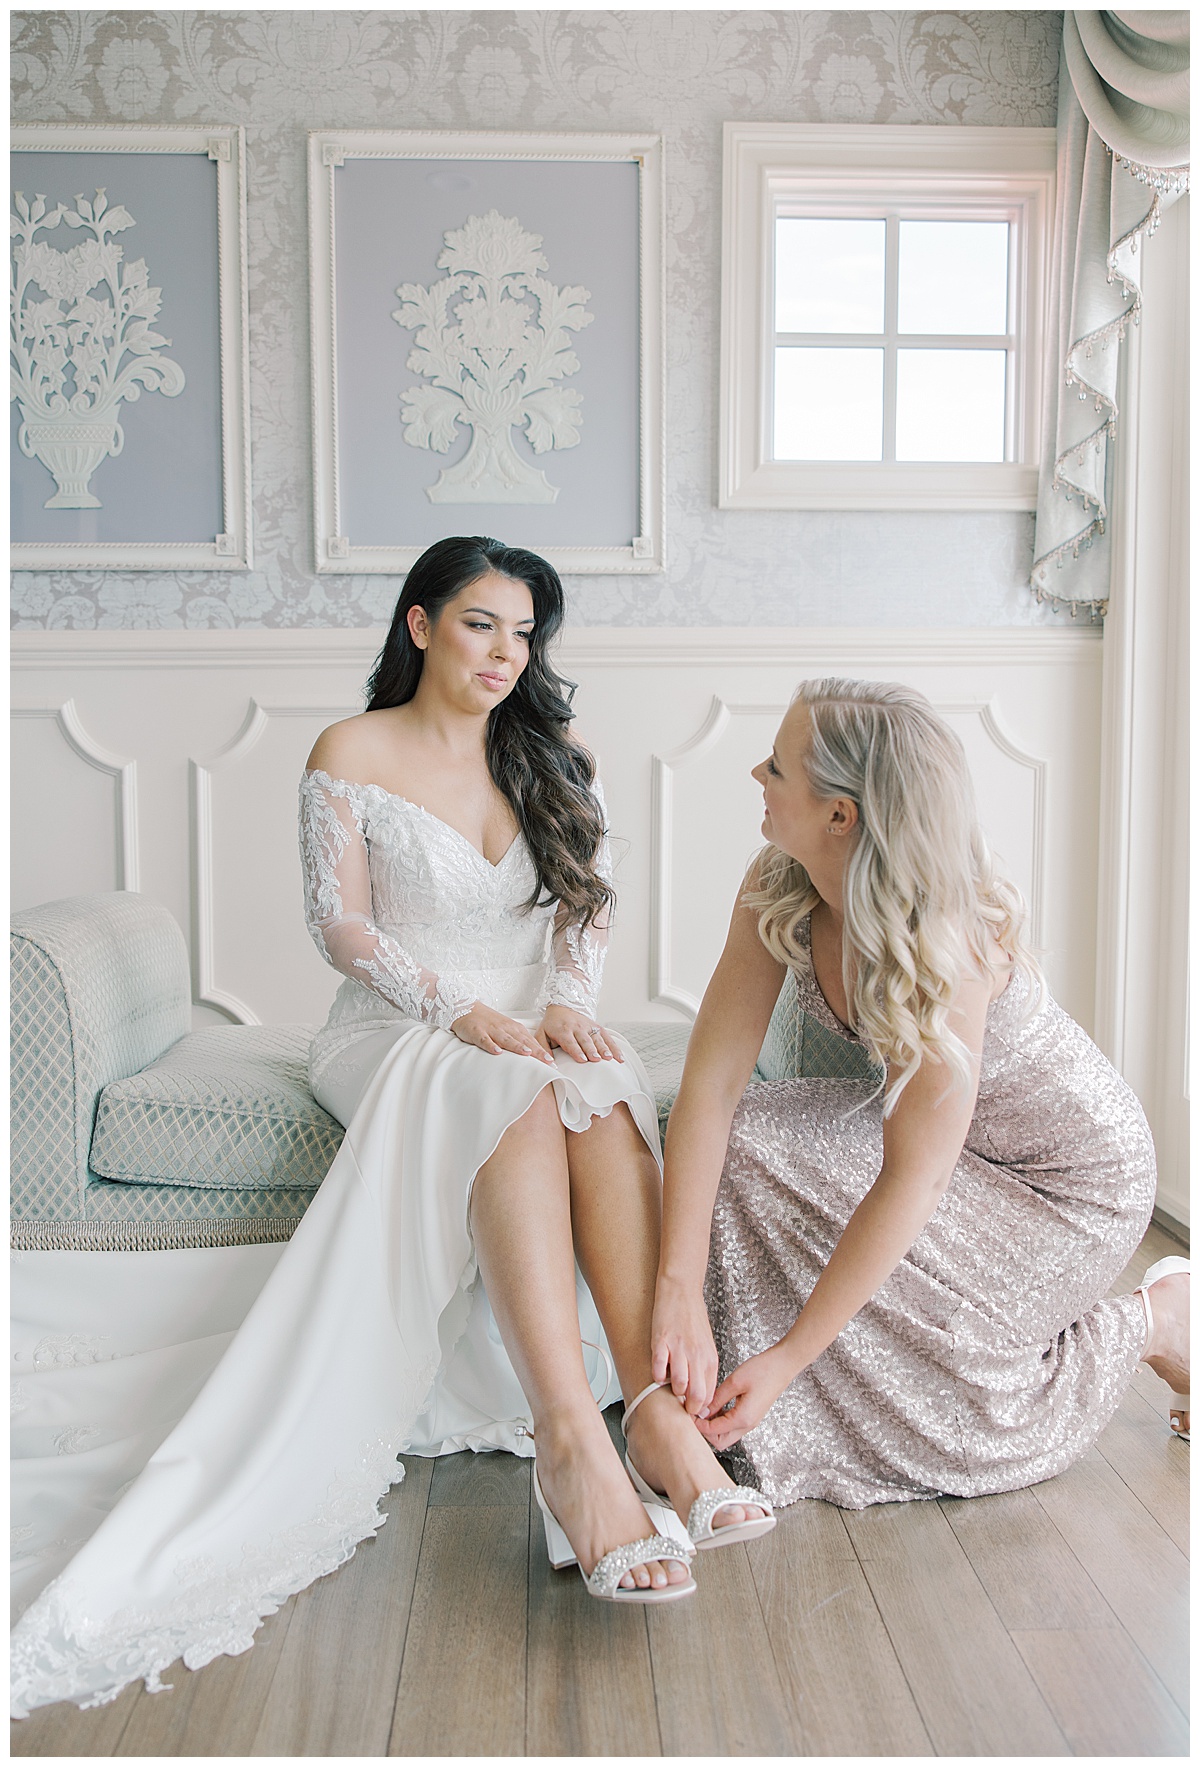 Maid of honor helping bride into her shoes on wedding day. 